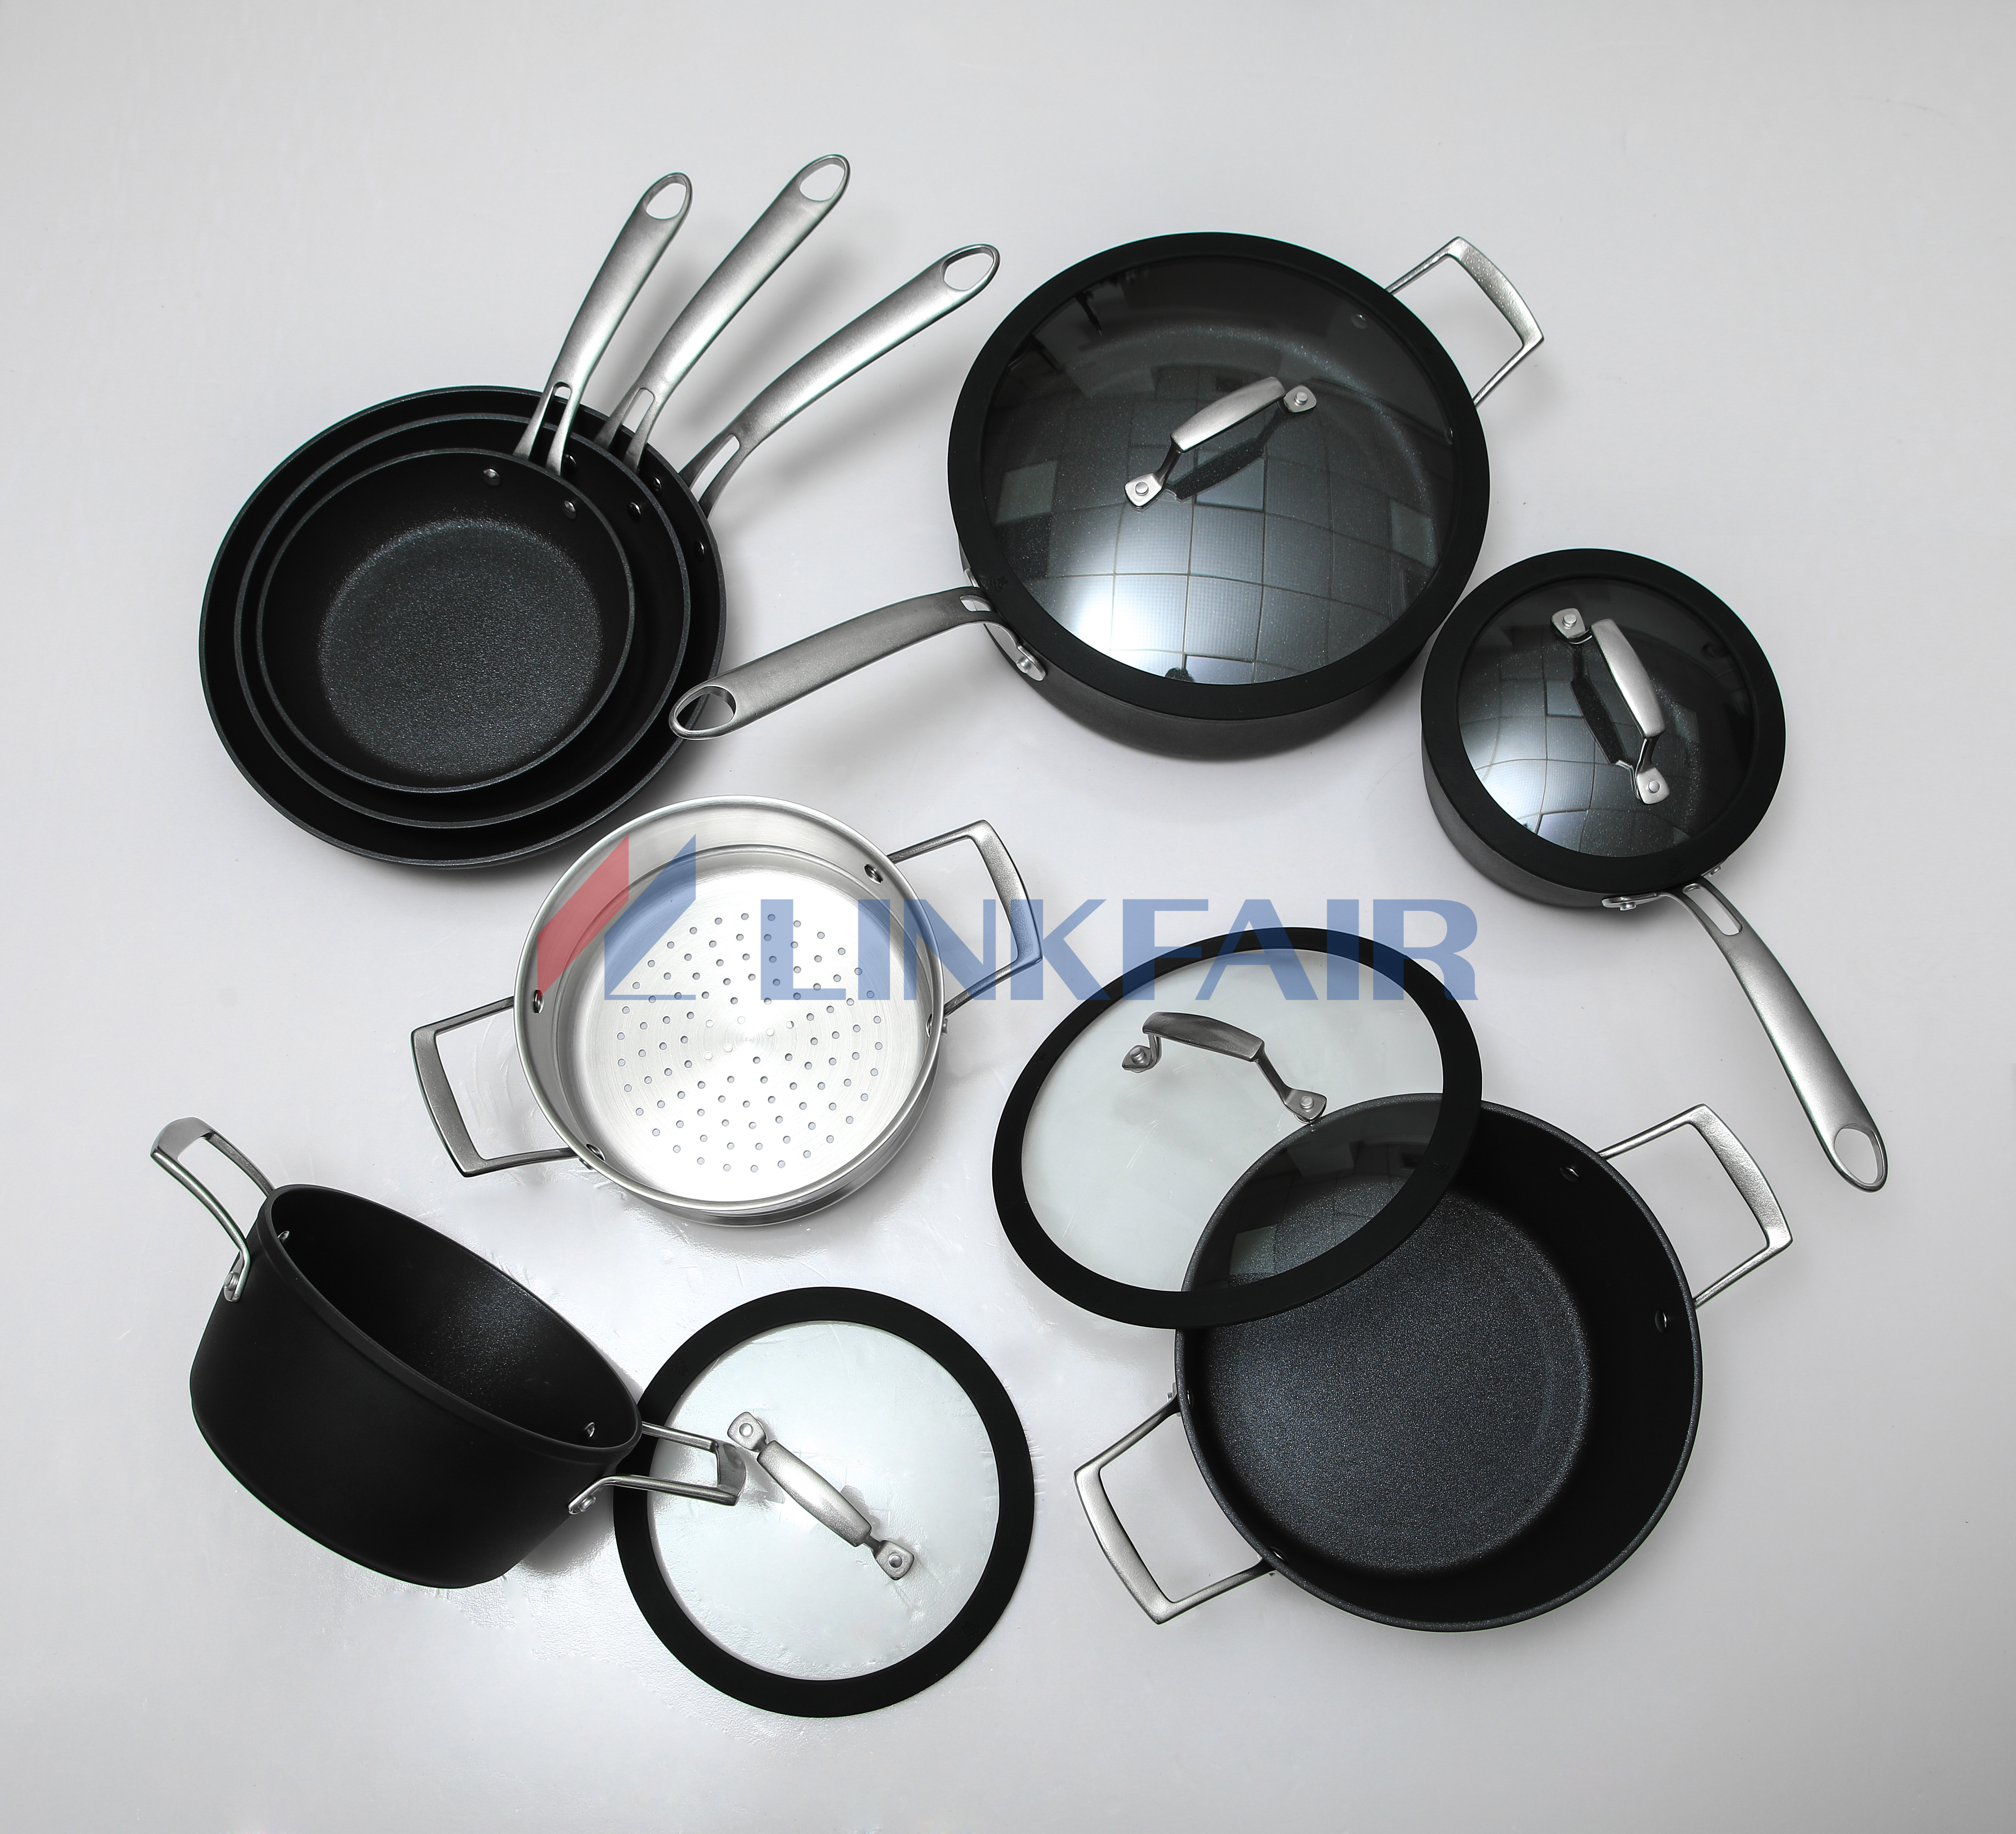 12-Piece Hard Anozided Cookwarer Set with Silicon Lid